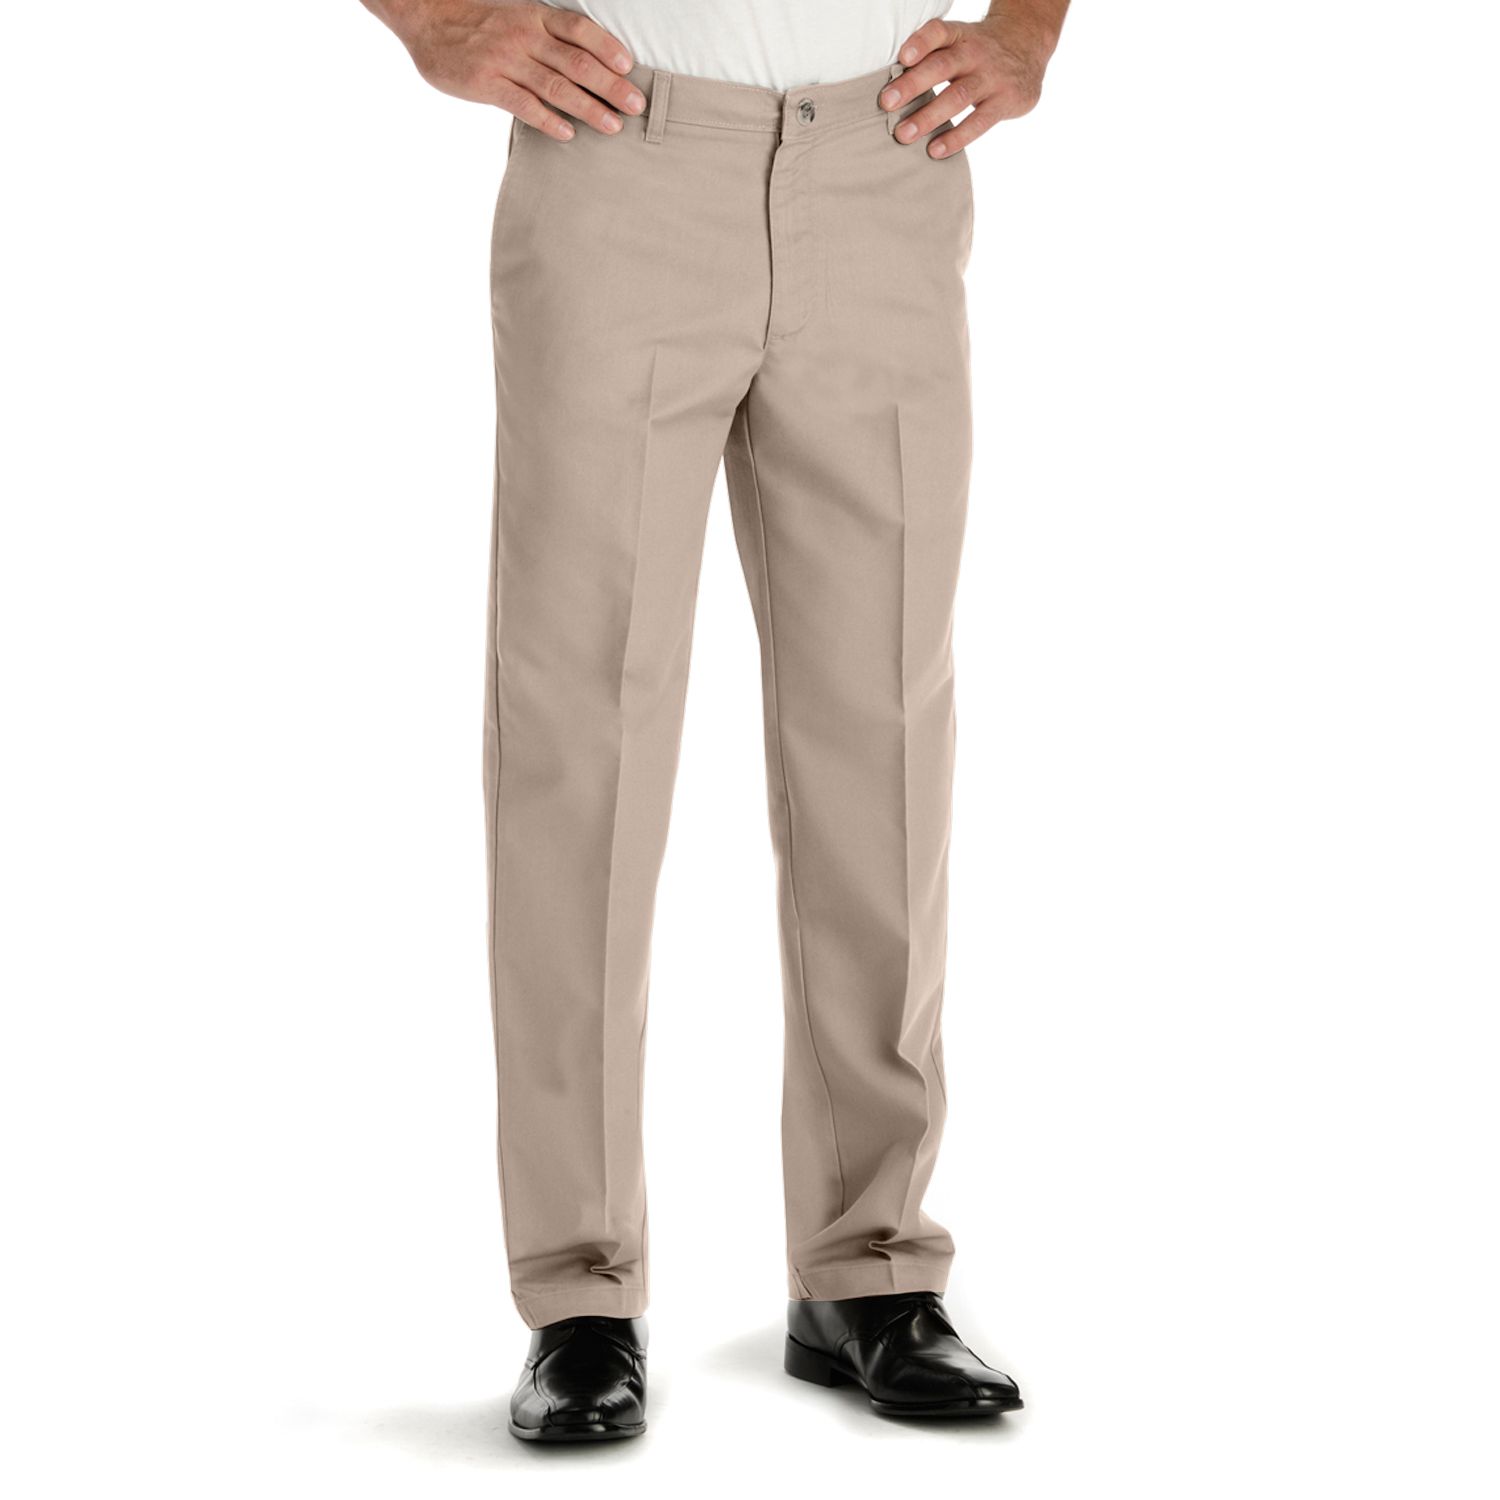 lee men's total freedom stretch relaxed fit flat front pant